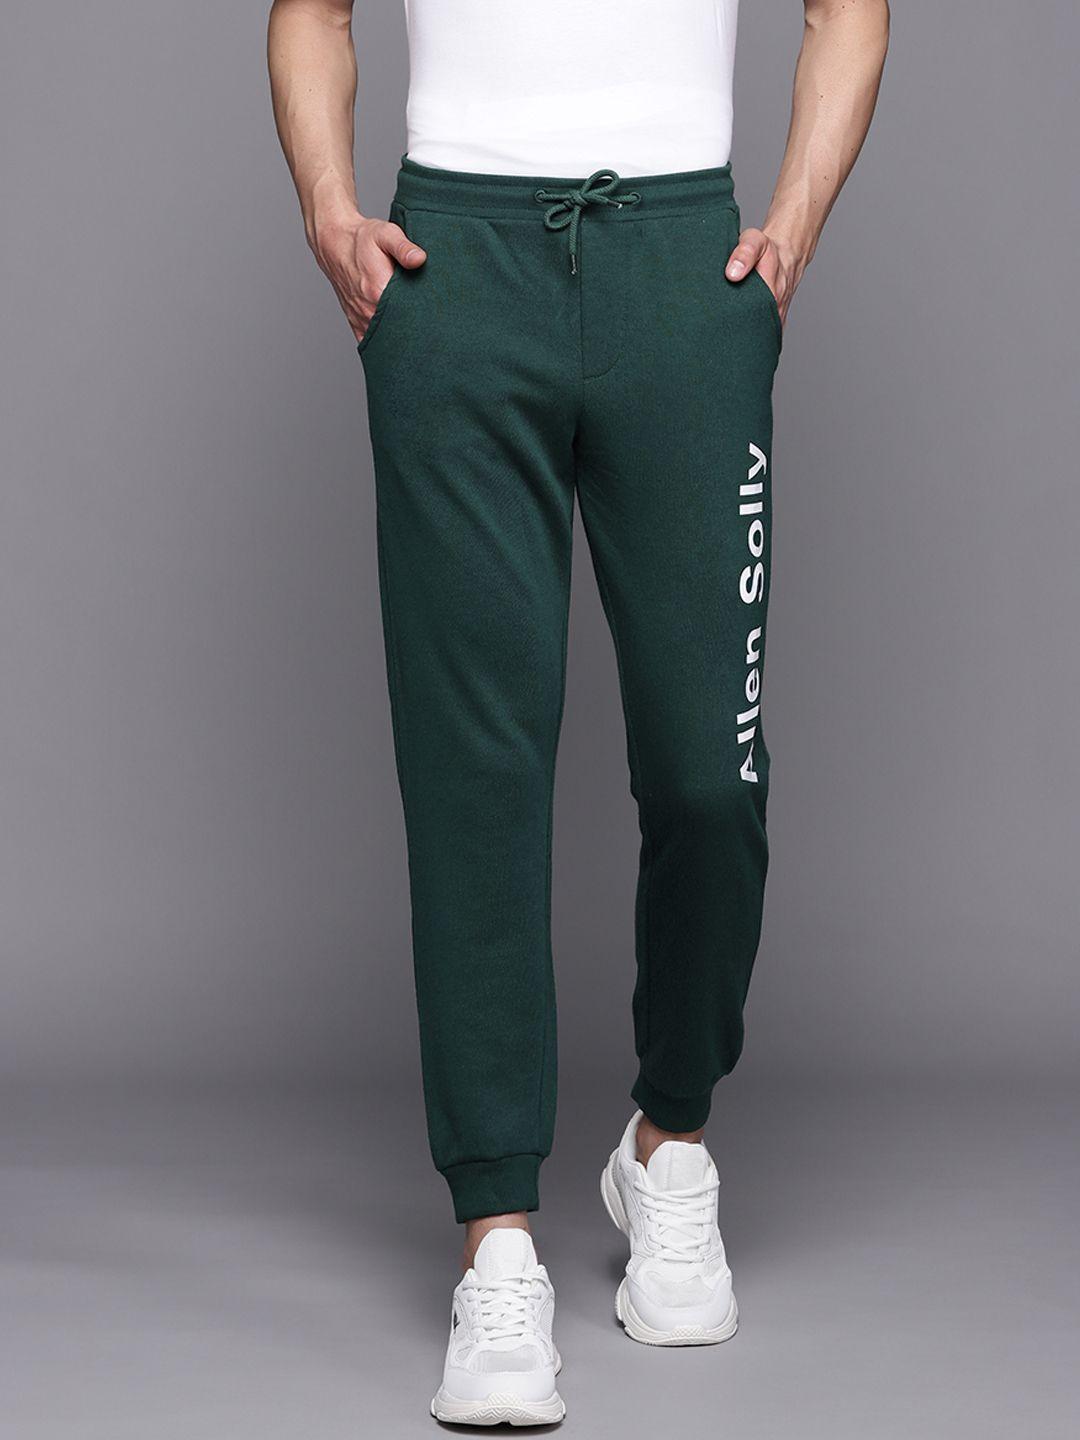 allen solly sport men green joggers with printed detail